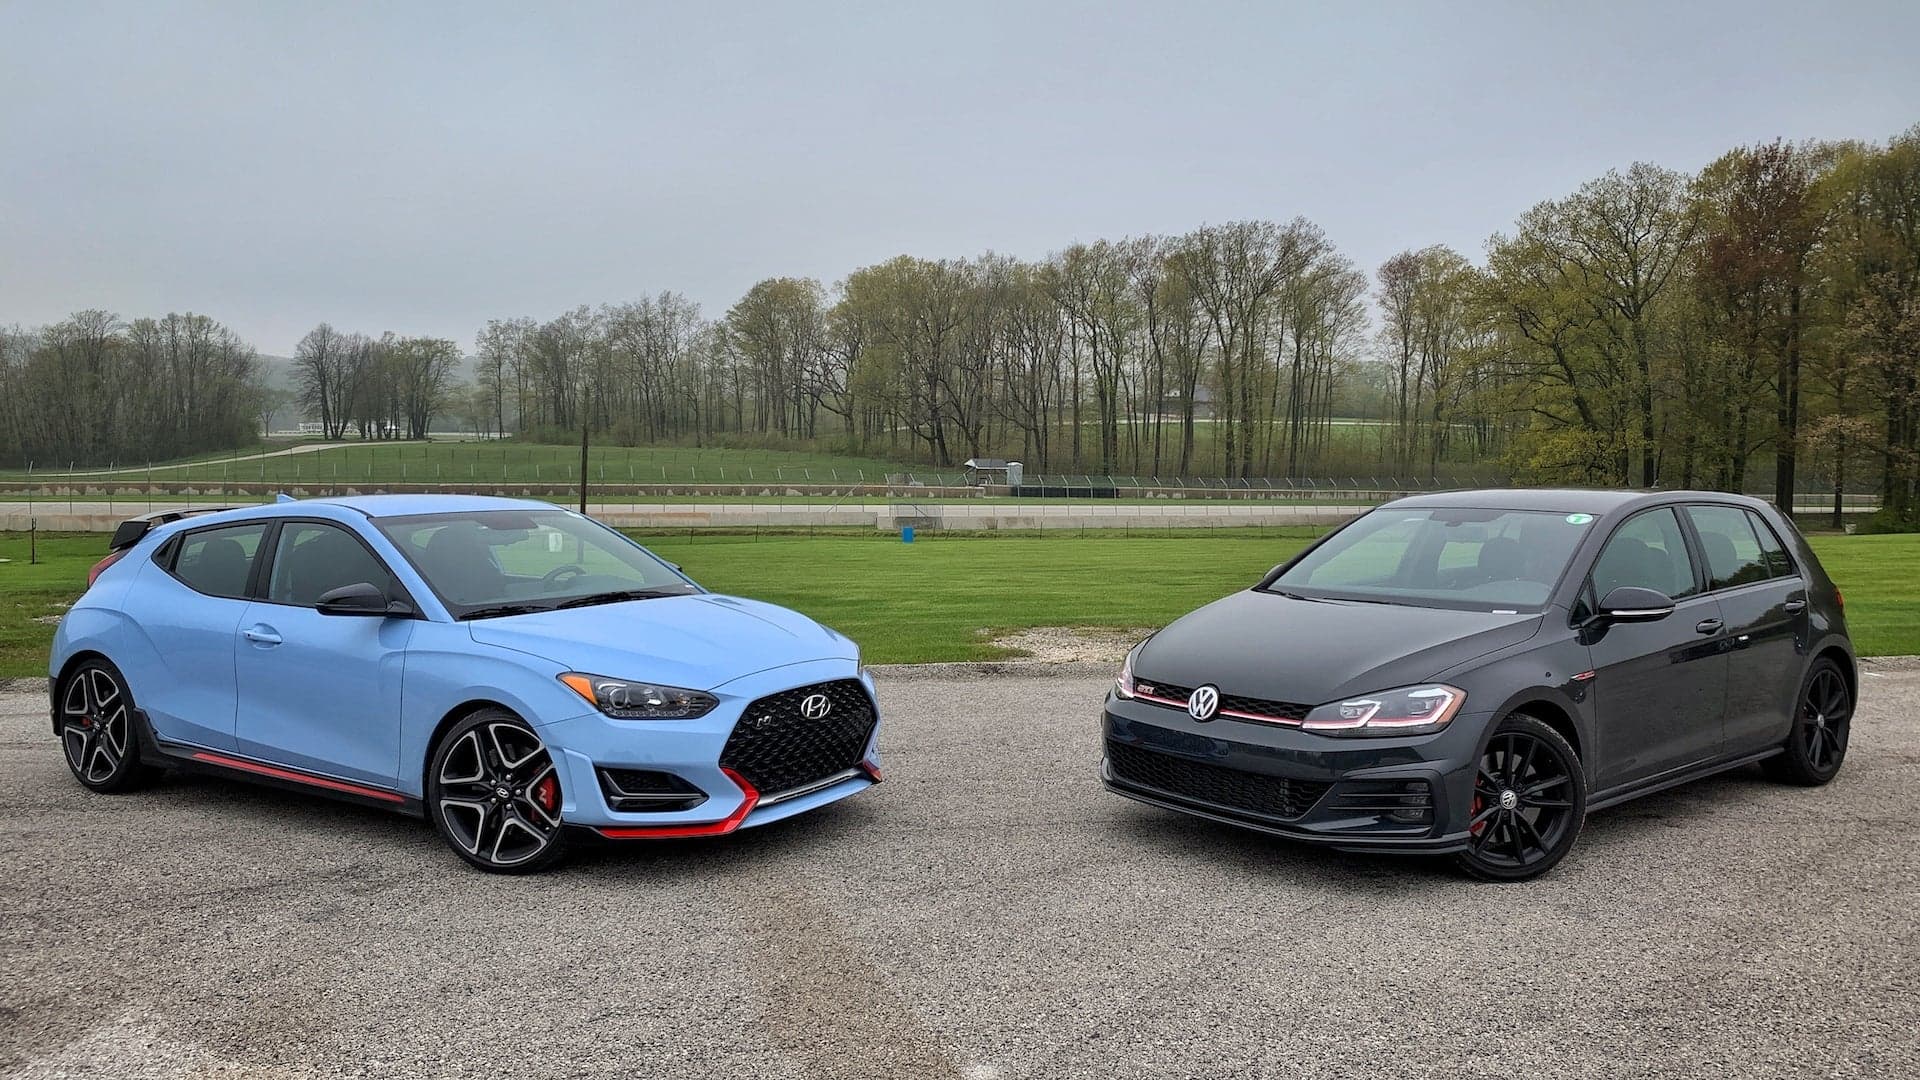 2019 Hyundai Veloster N vs. 2019 VW Golf GTI Comparison Review: Two Hot Hatches Blitz the Track